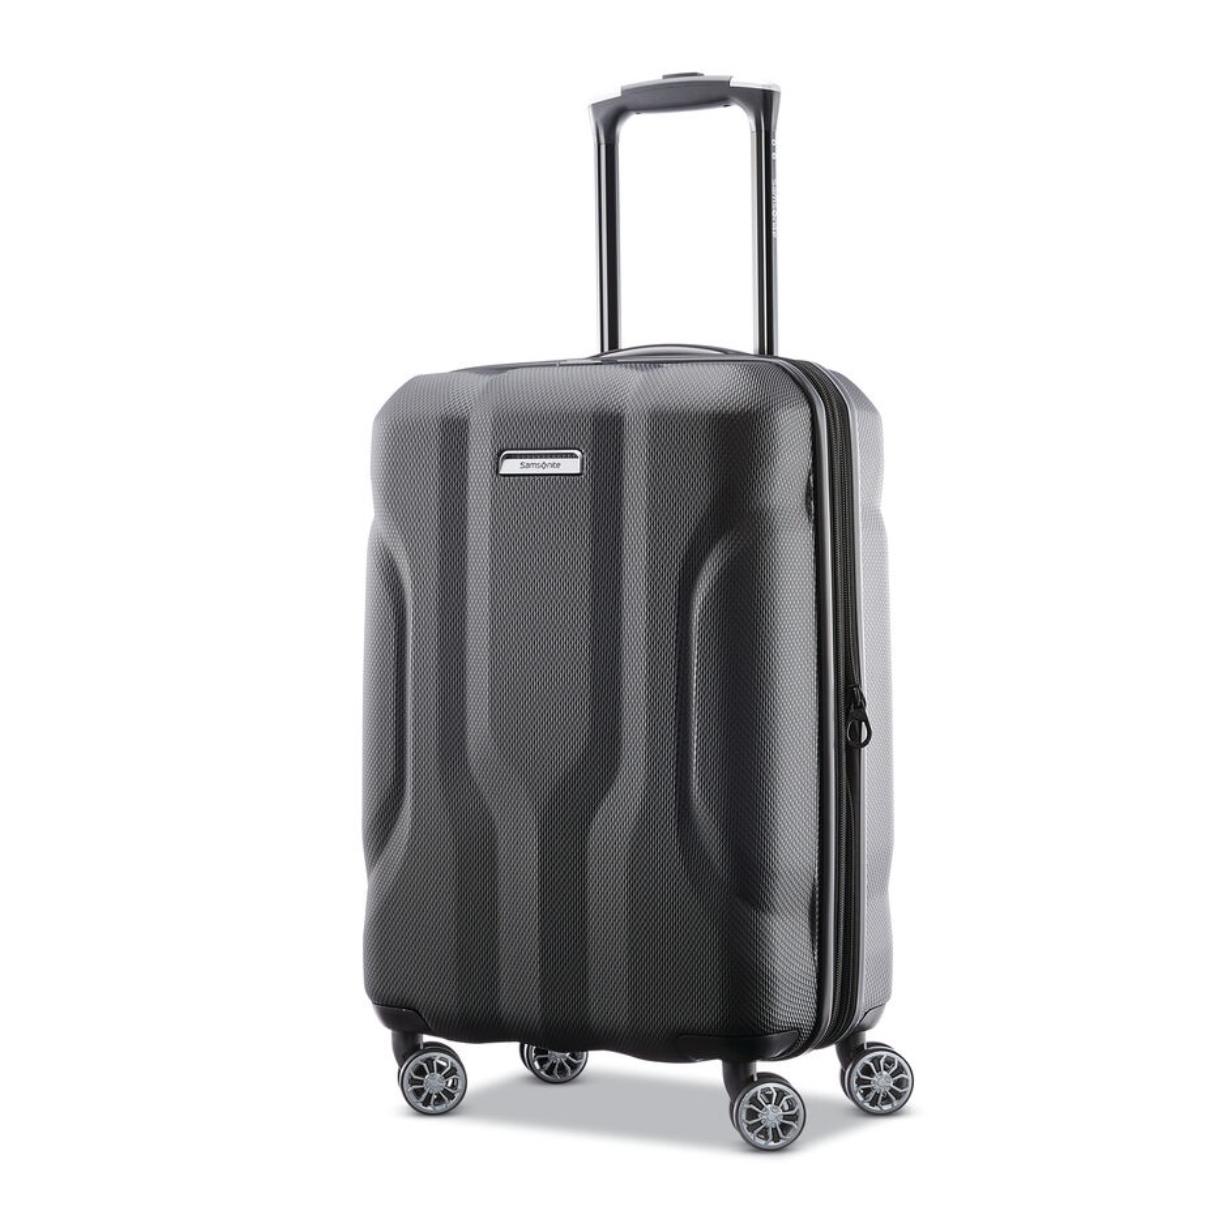 Pivot 2 22x14x9 Carry-On Spinner